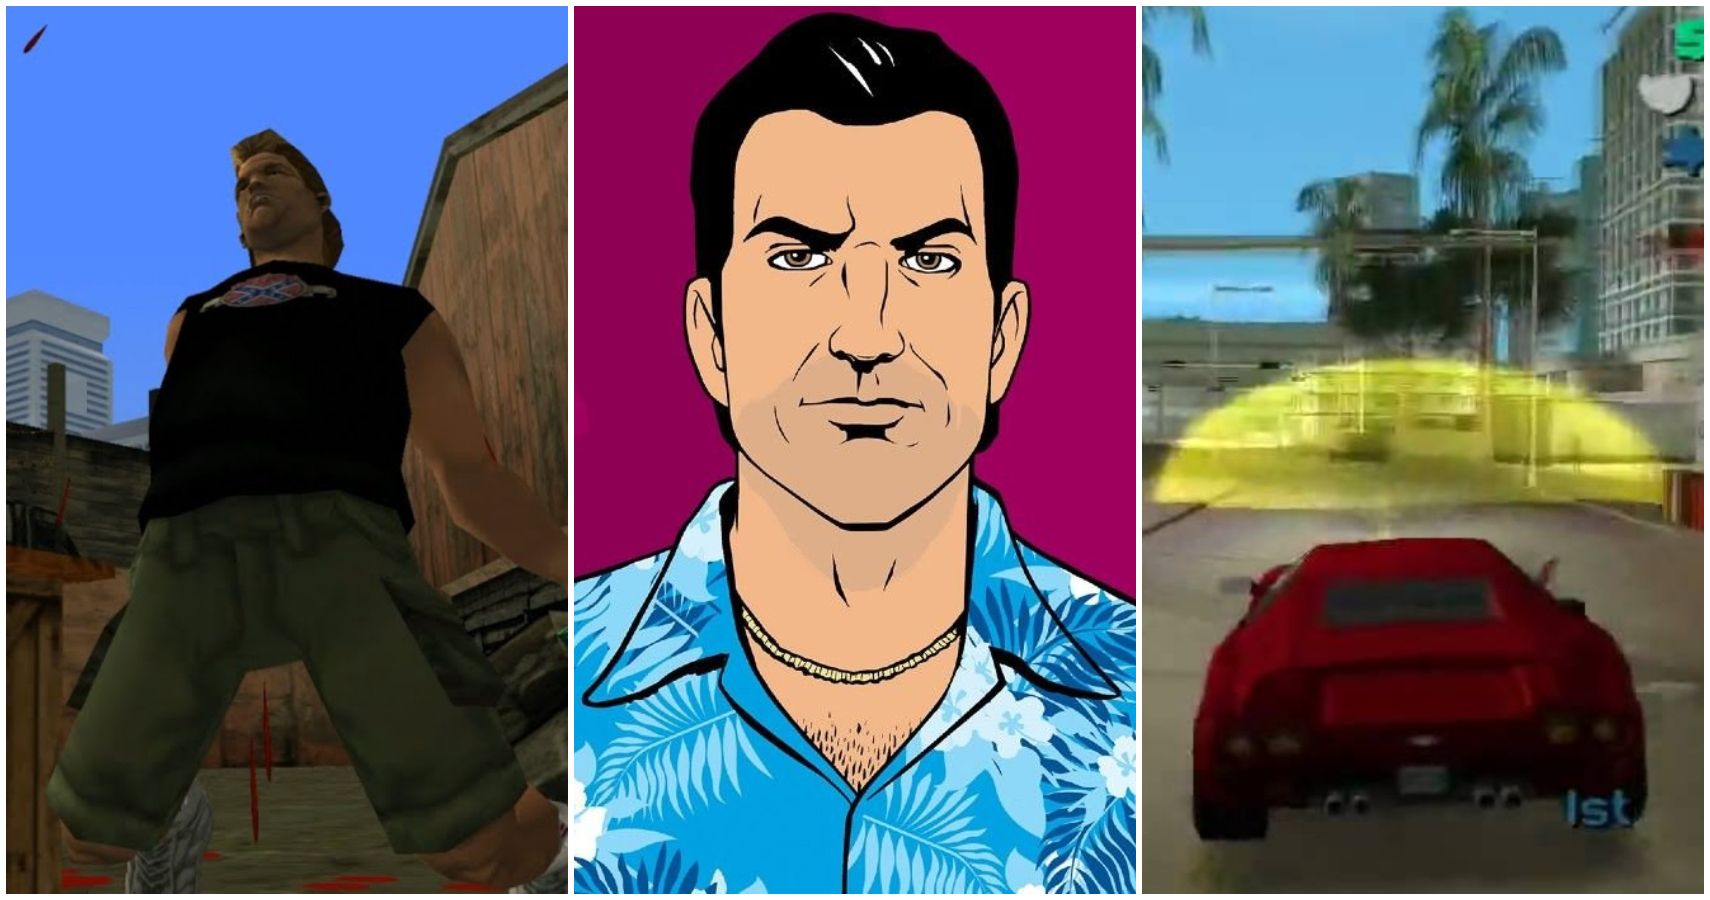 Grand Theft Auto: Vice City – The Definitive Edition Guide – How to Earn  Money Quickly